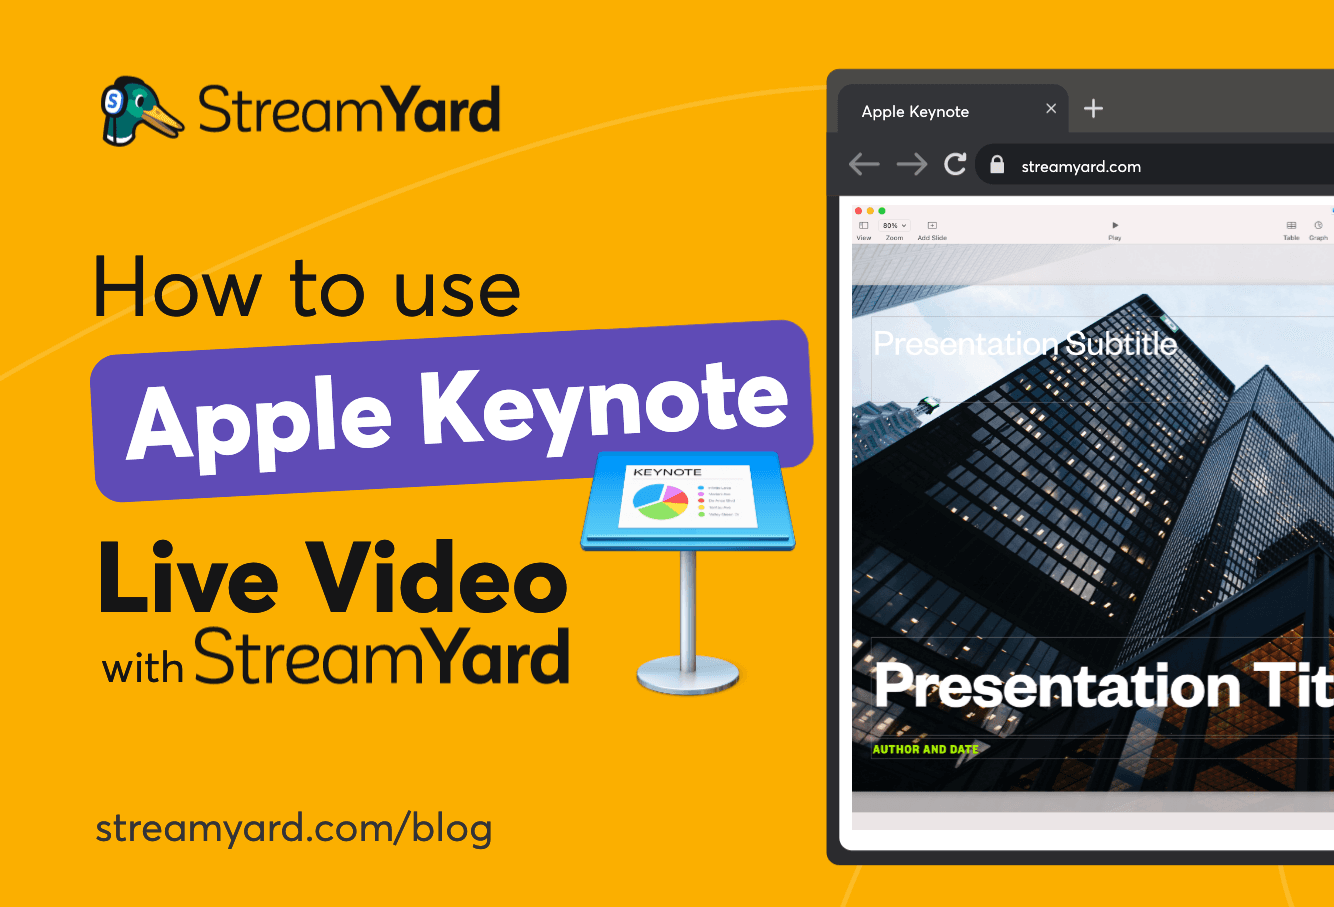 Learn how to use Apple Keynote Live with StreamYard to multistream your live video presentations across different channels.